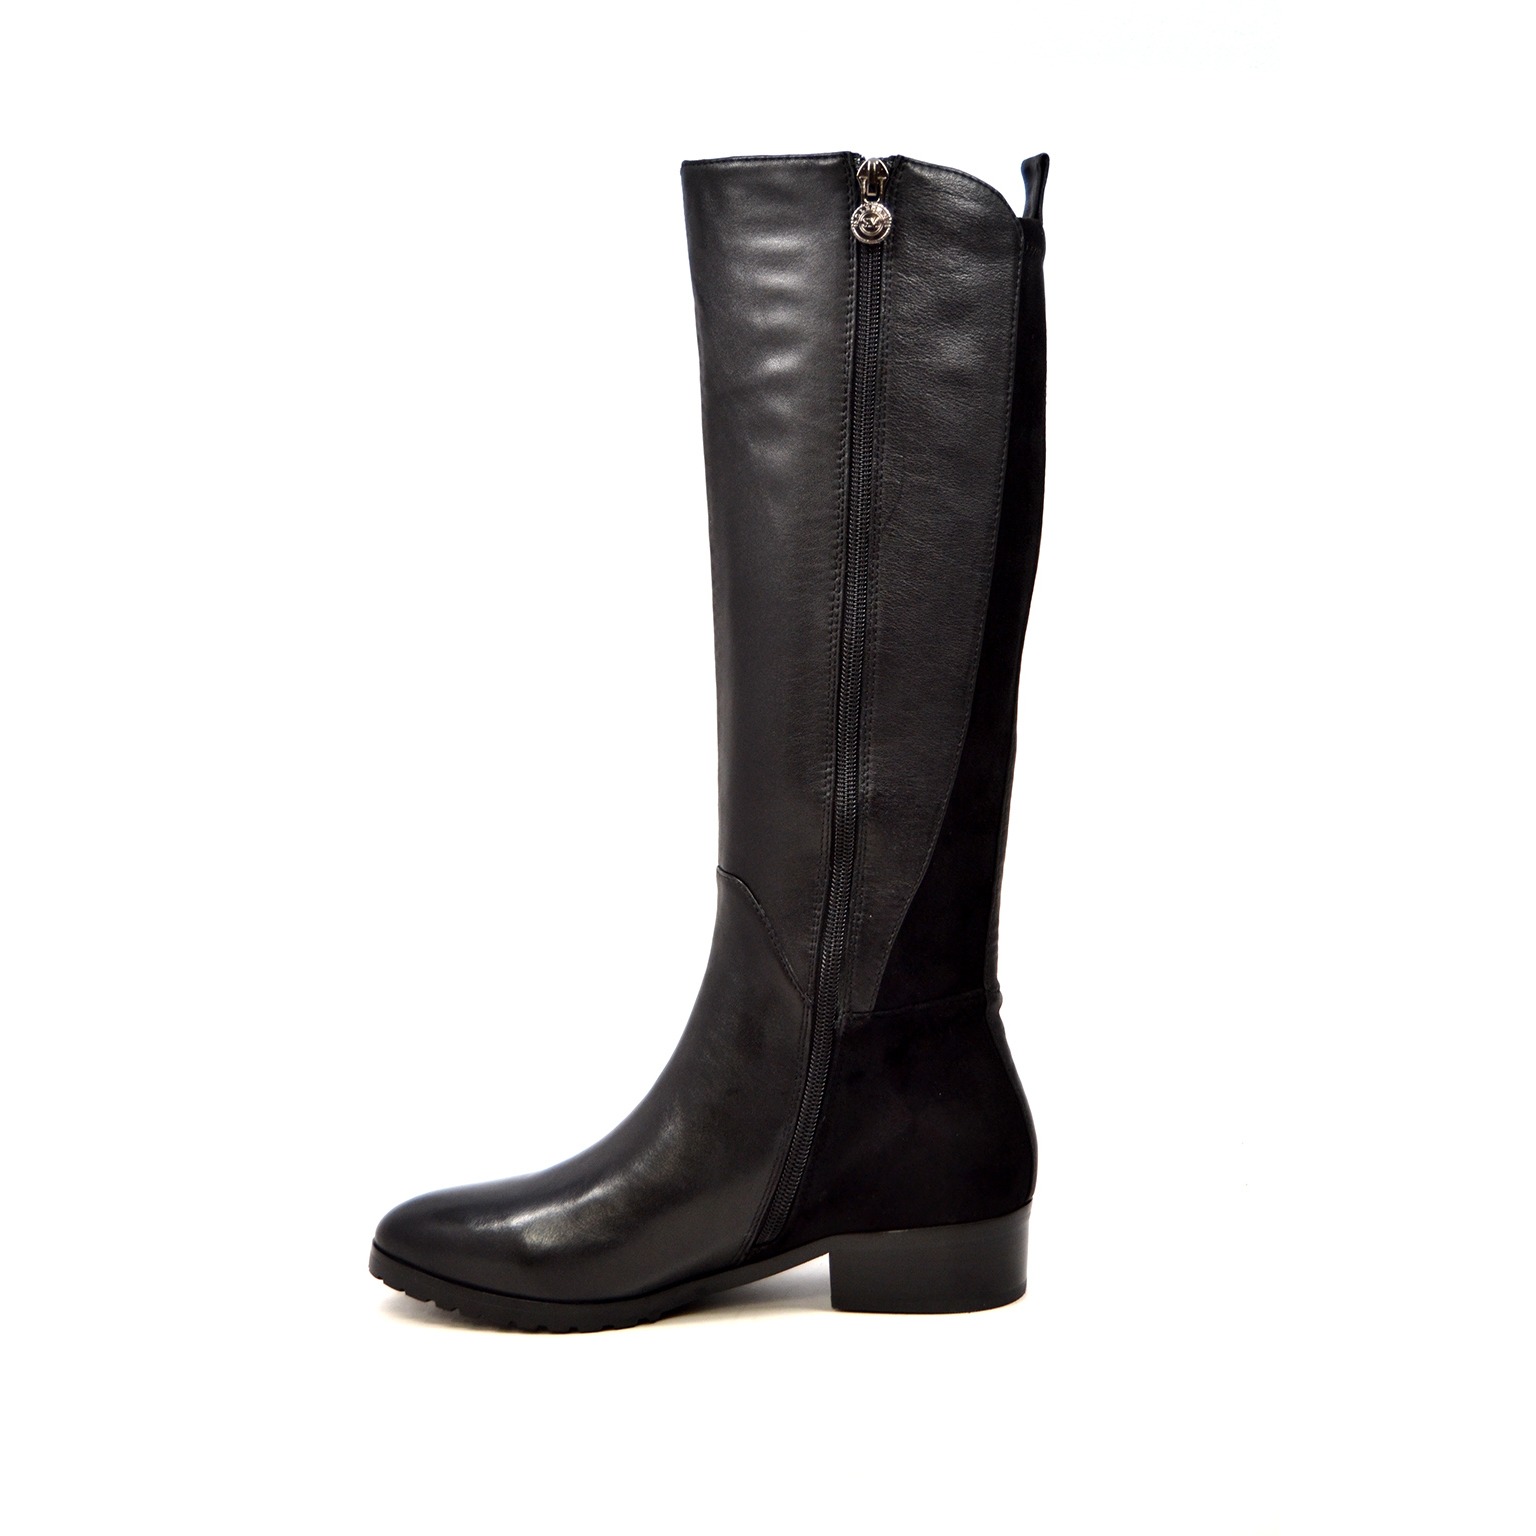 black leather knee high boots narrow calf